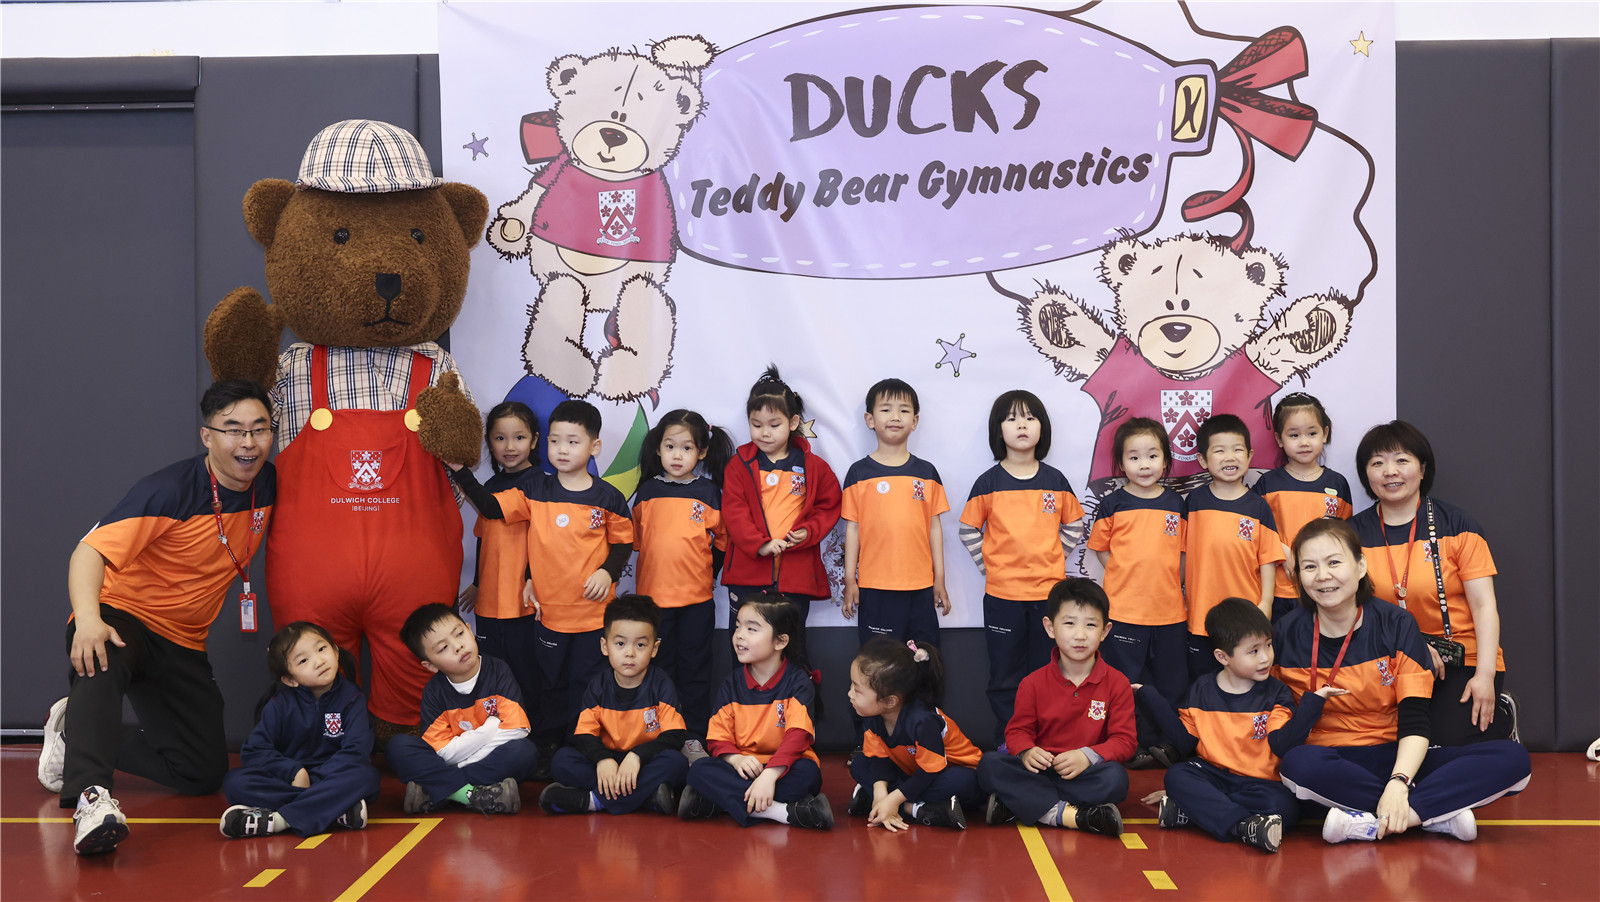 Oliver Du with students at Teddy Bear Gym event